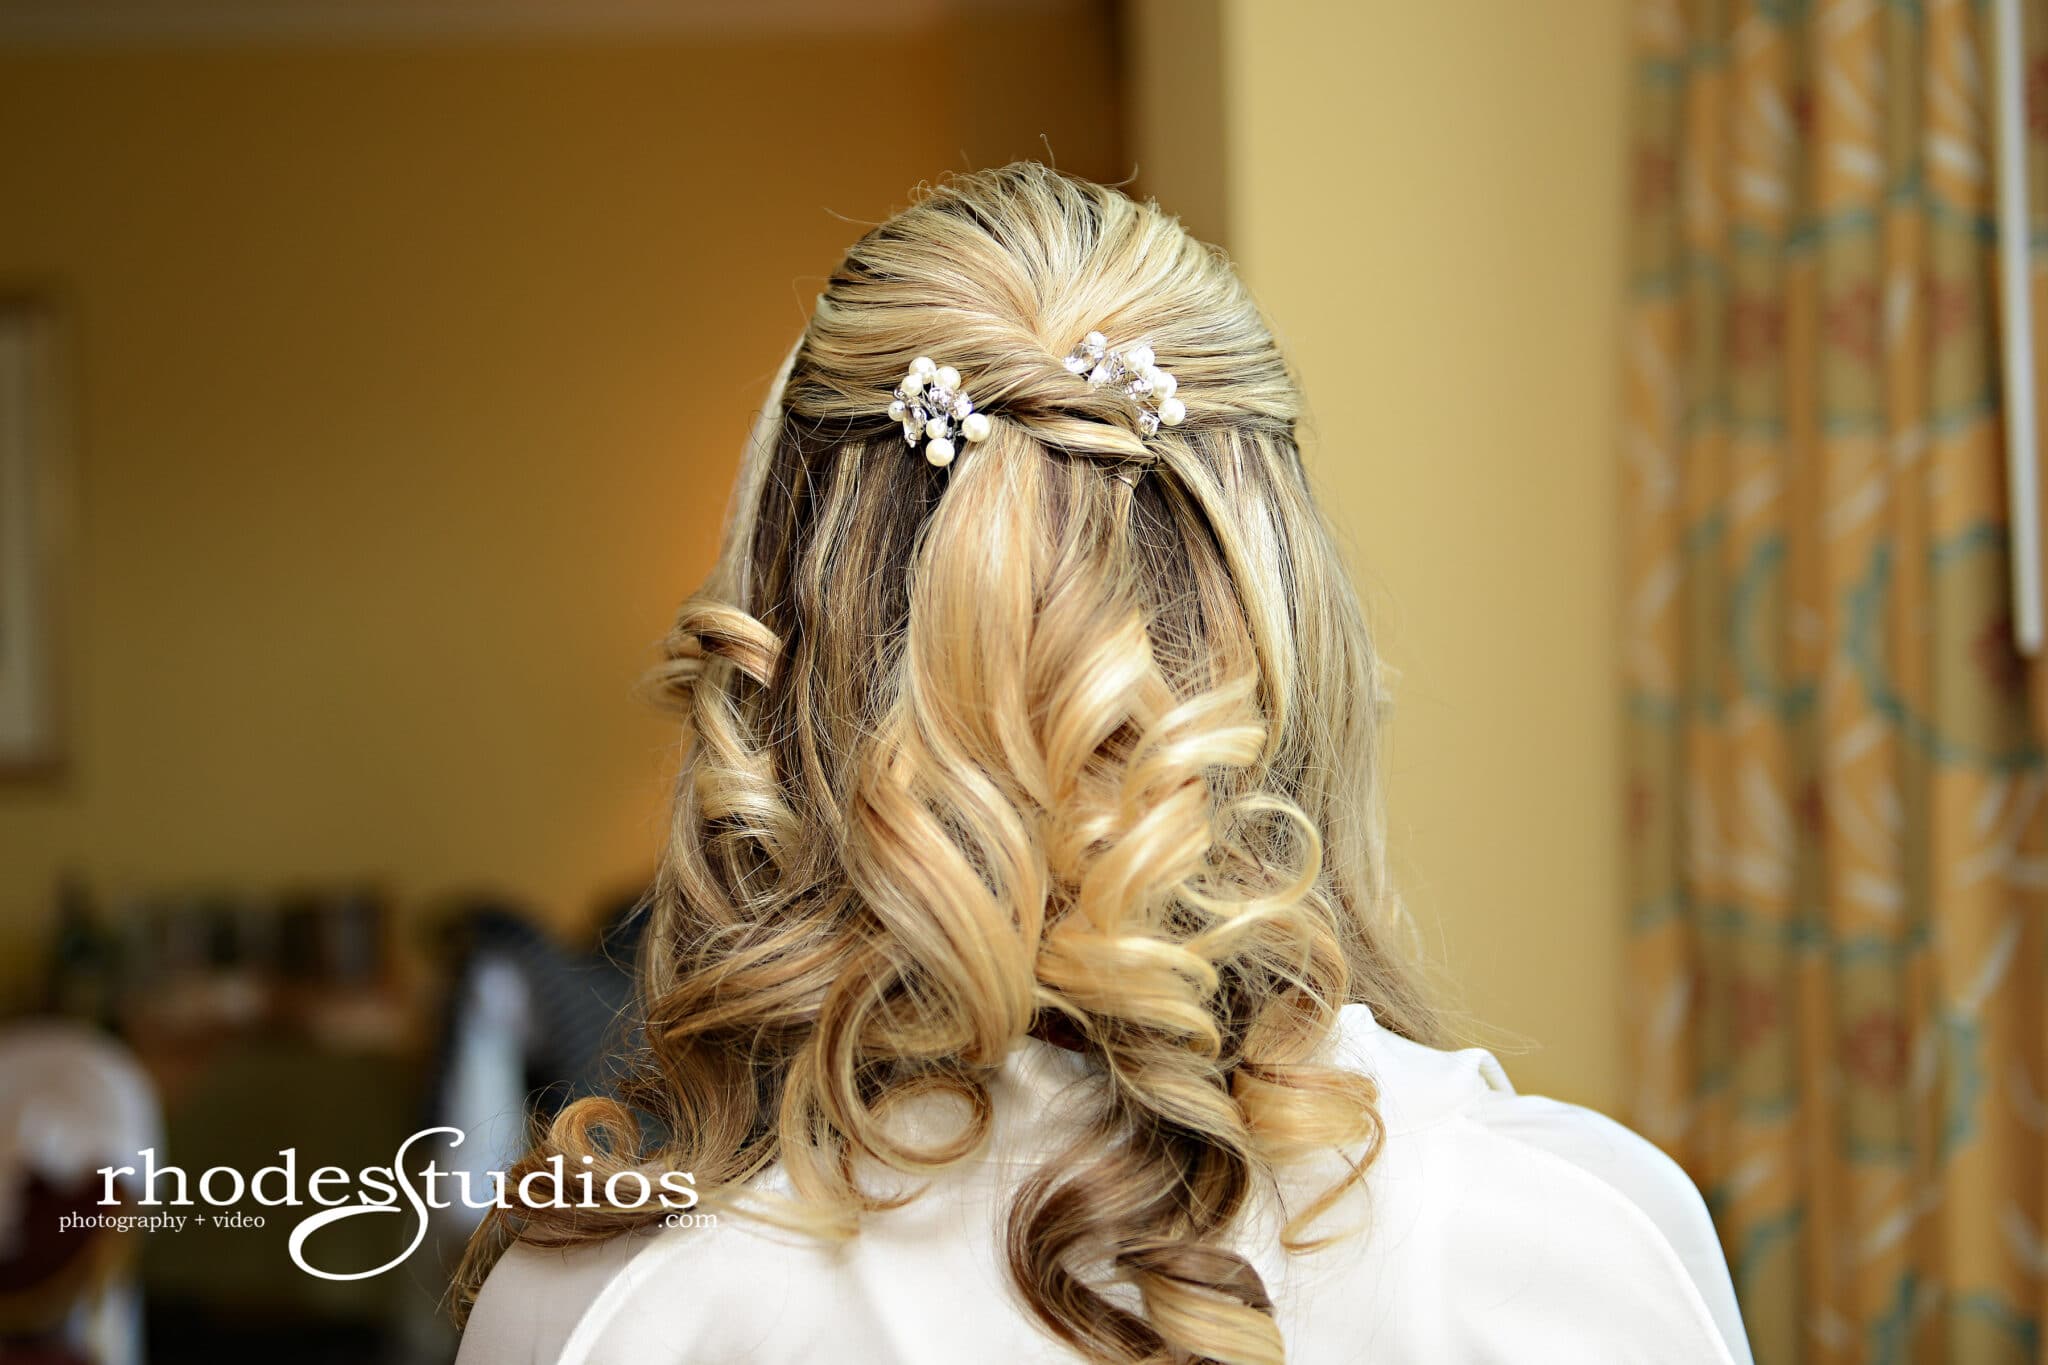 Bride's hairstyle with pearl accent pieces